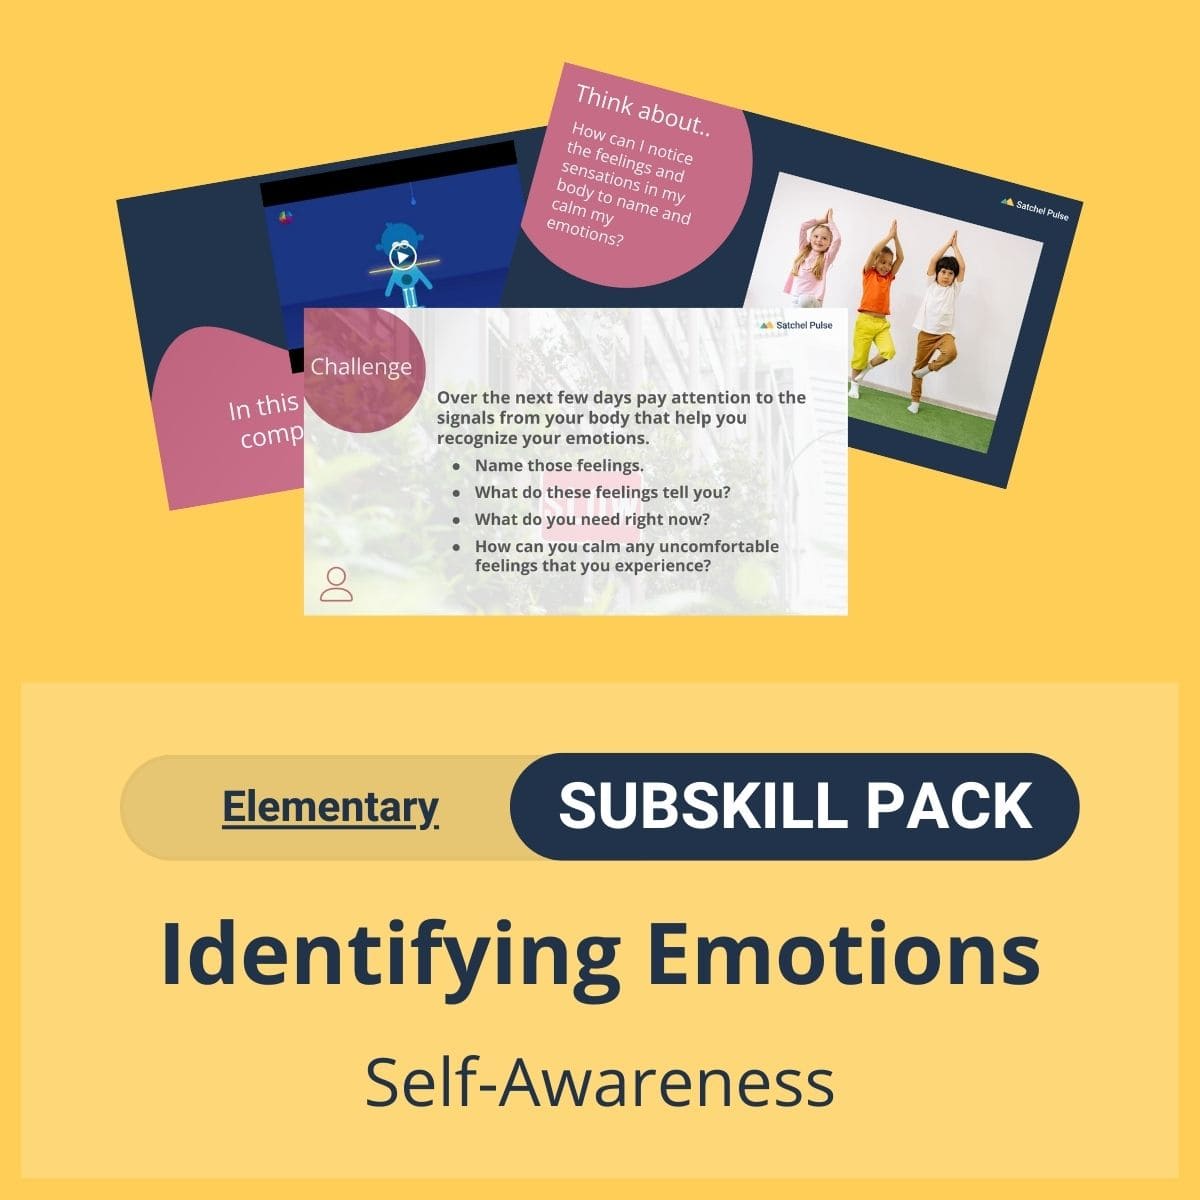 SEL Resource pack with social-emotional learning lessons and self-studies to help you teach Identifying Emotions in your classroom as a part of the SEL curriculum.SEL Resource pack with social-emotional learning lessons and self-studies to help you teach Identifying Emotions in your classroom as a part of the SEL curriculum.